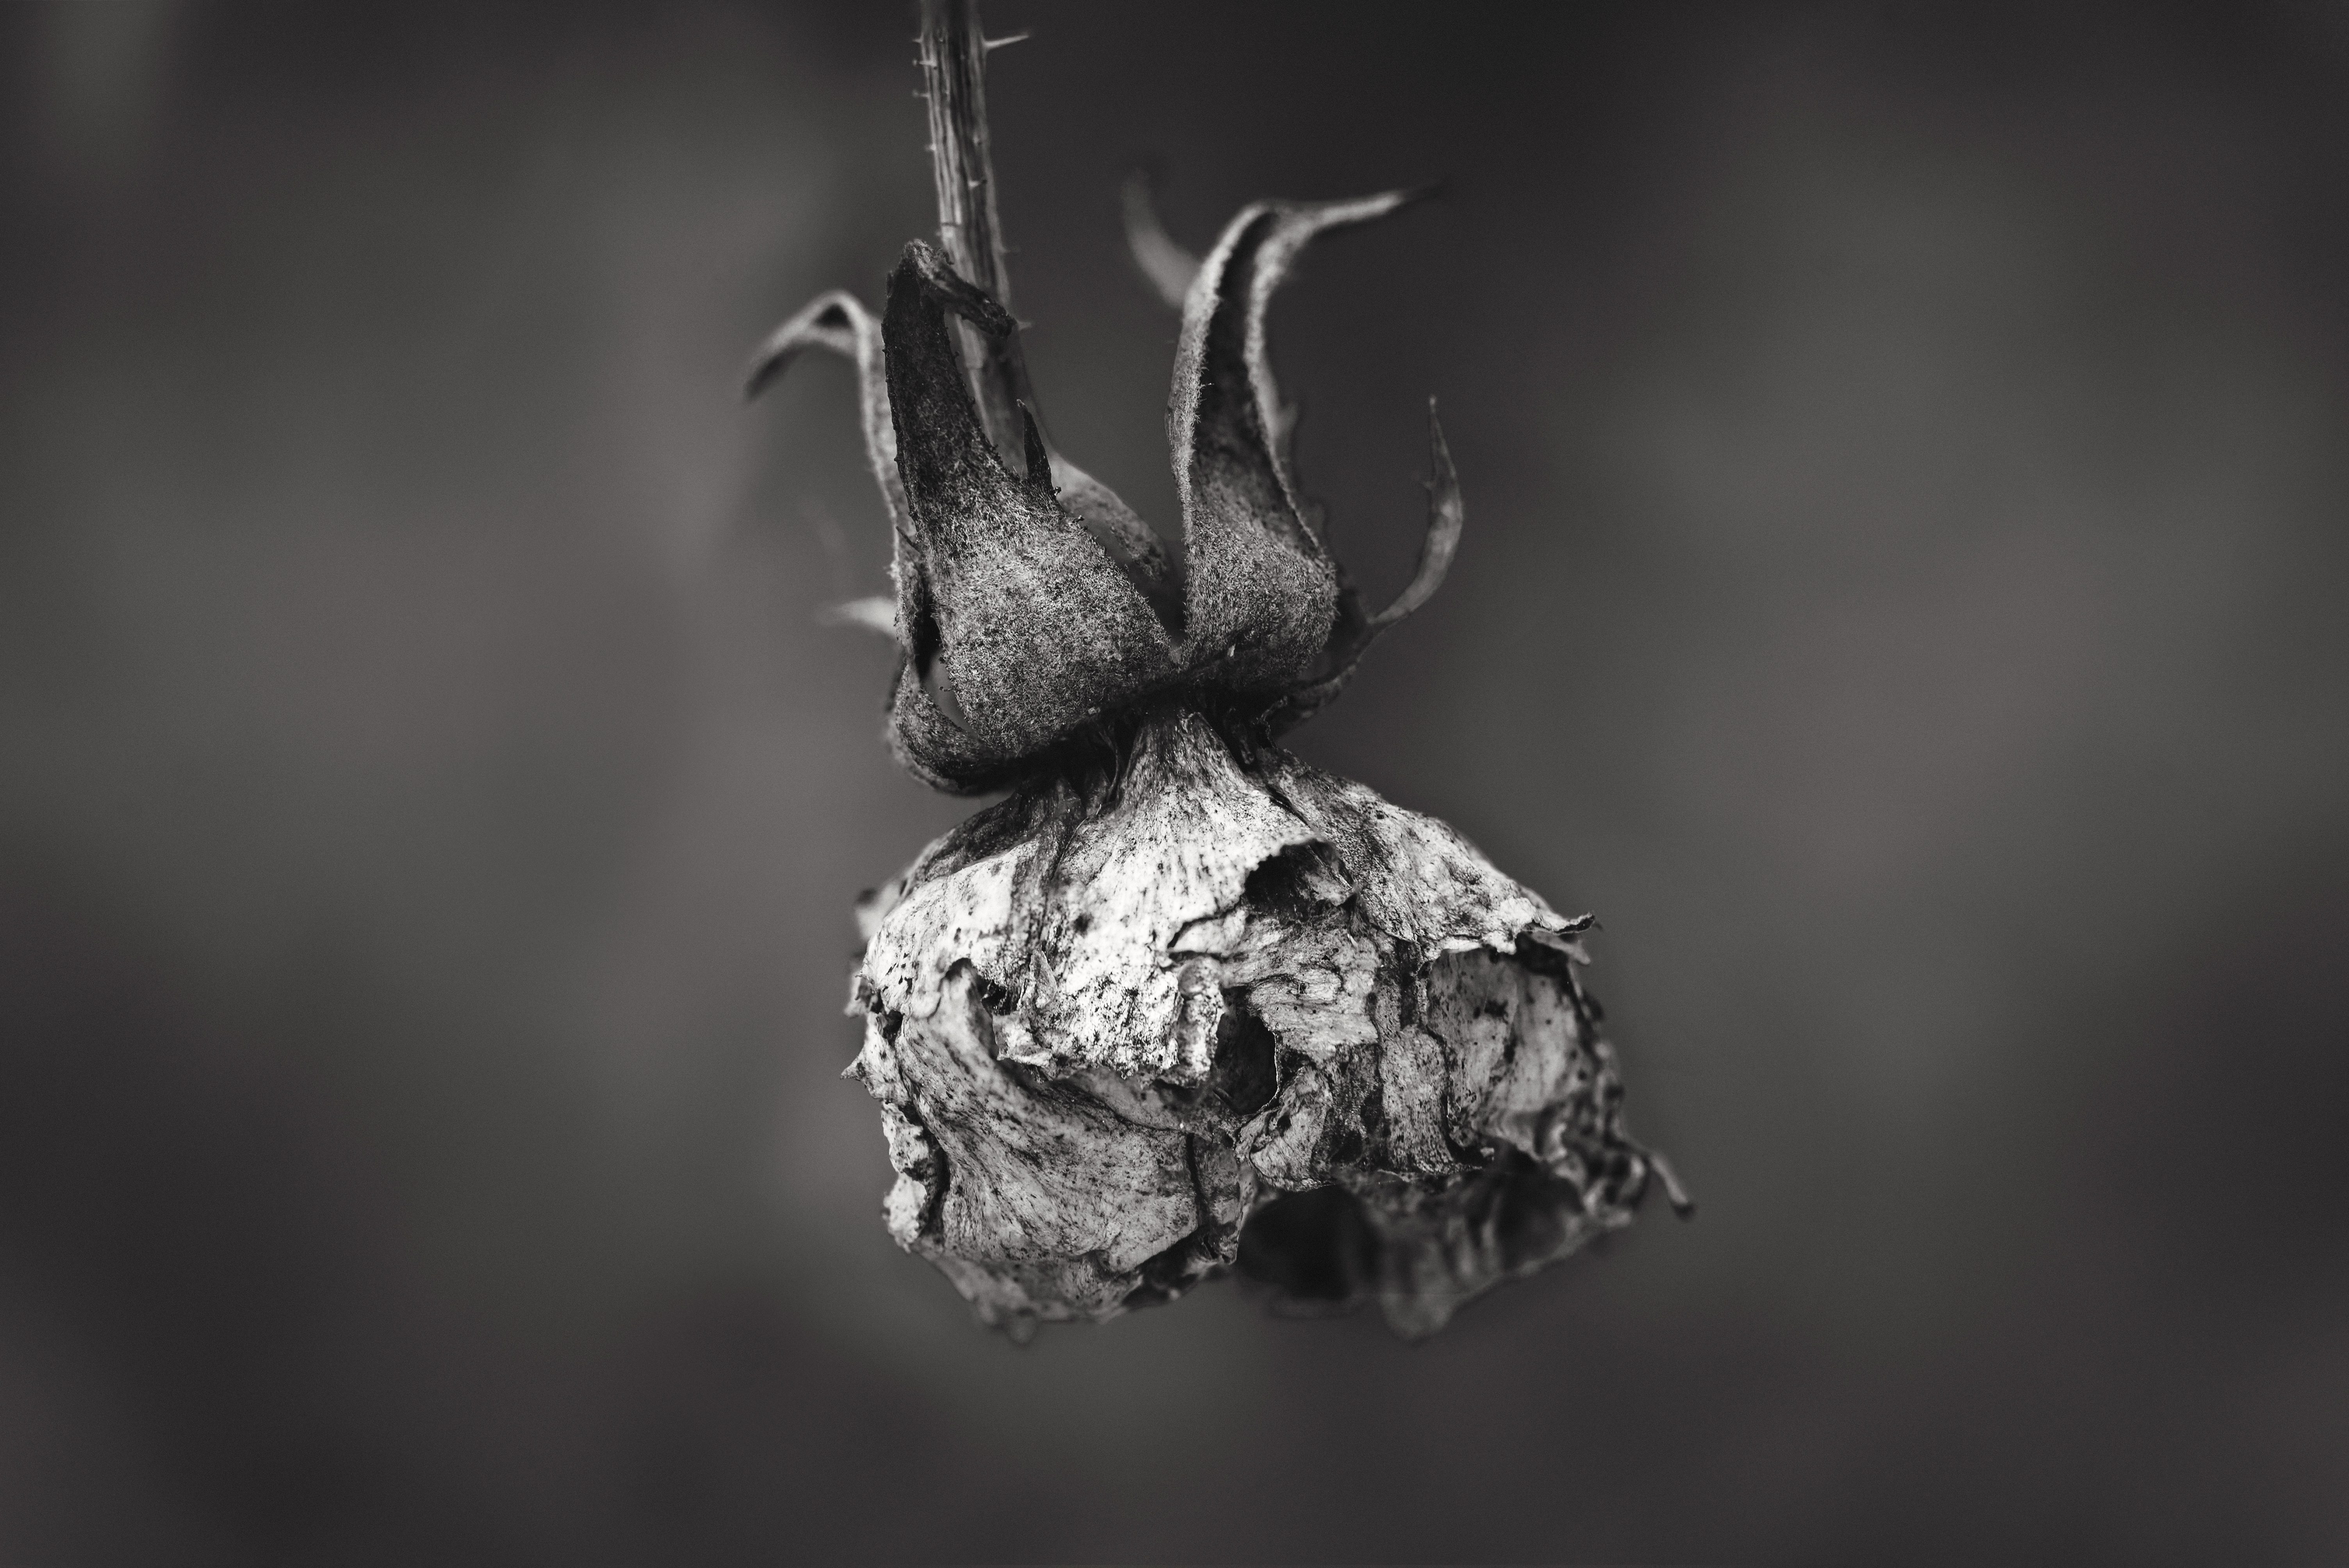 New Braunfels nature macro decay black and white photographer